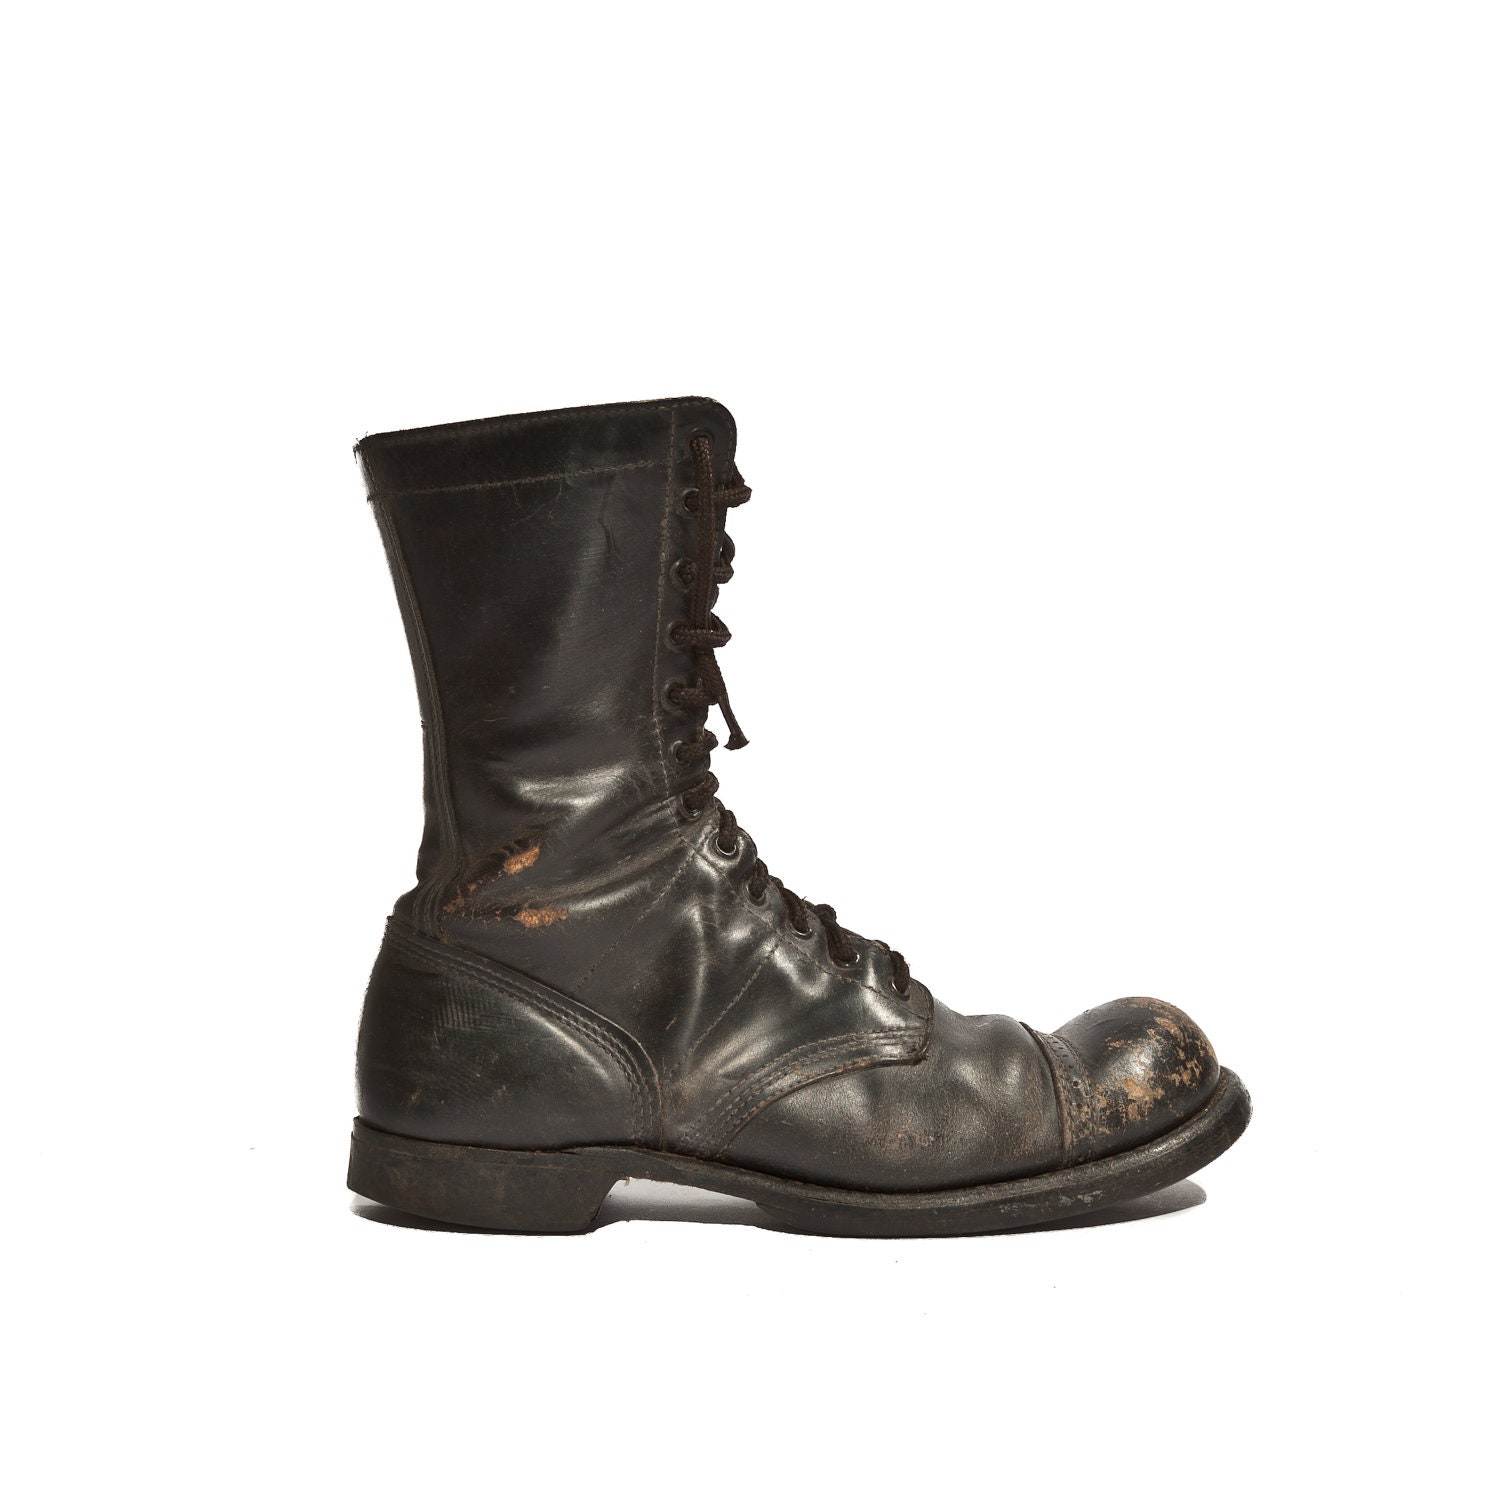 Men's Vintage Combat Boots by Corcoran in a by RabbitHouseVintage